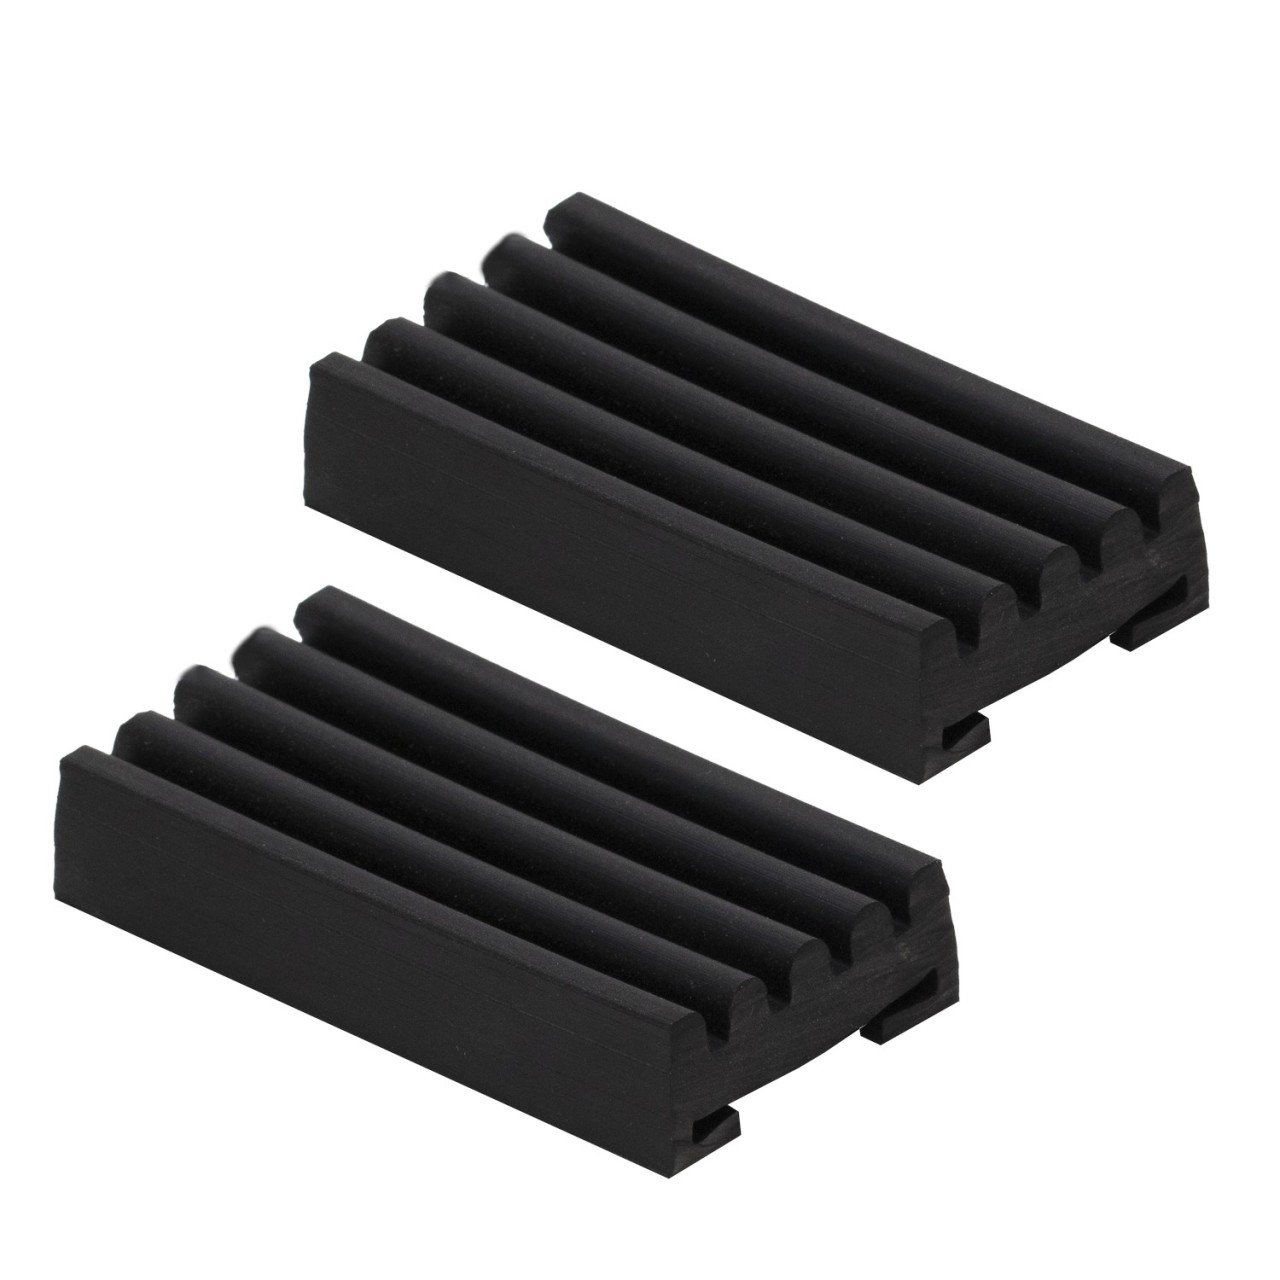 Clamp Rubber